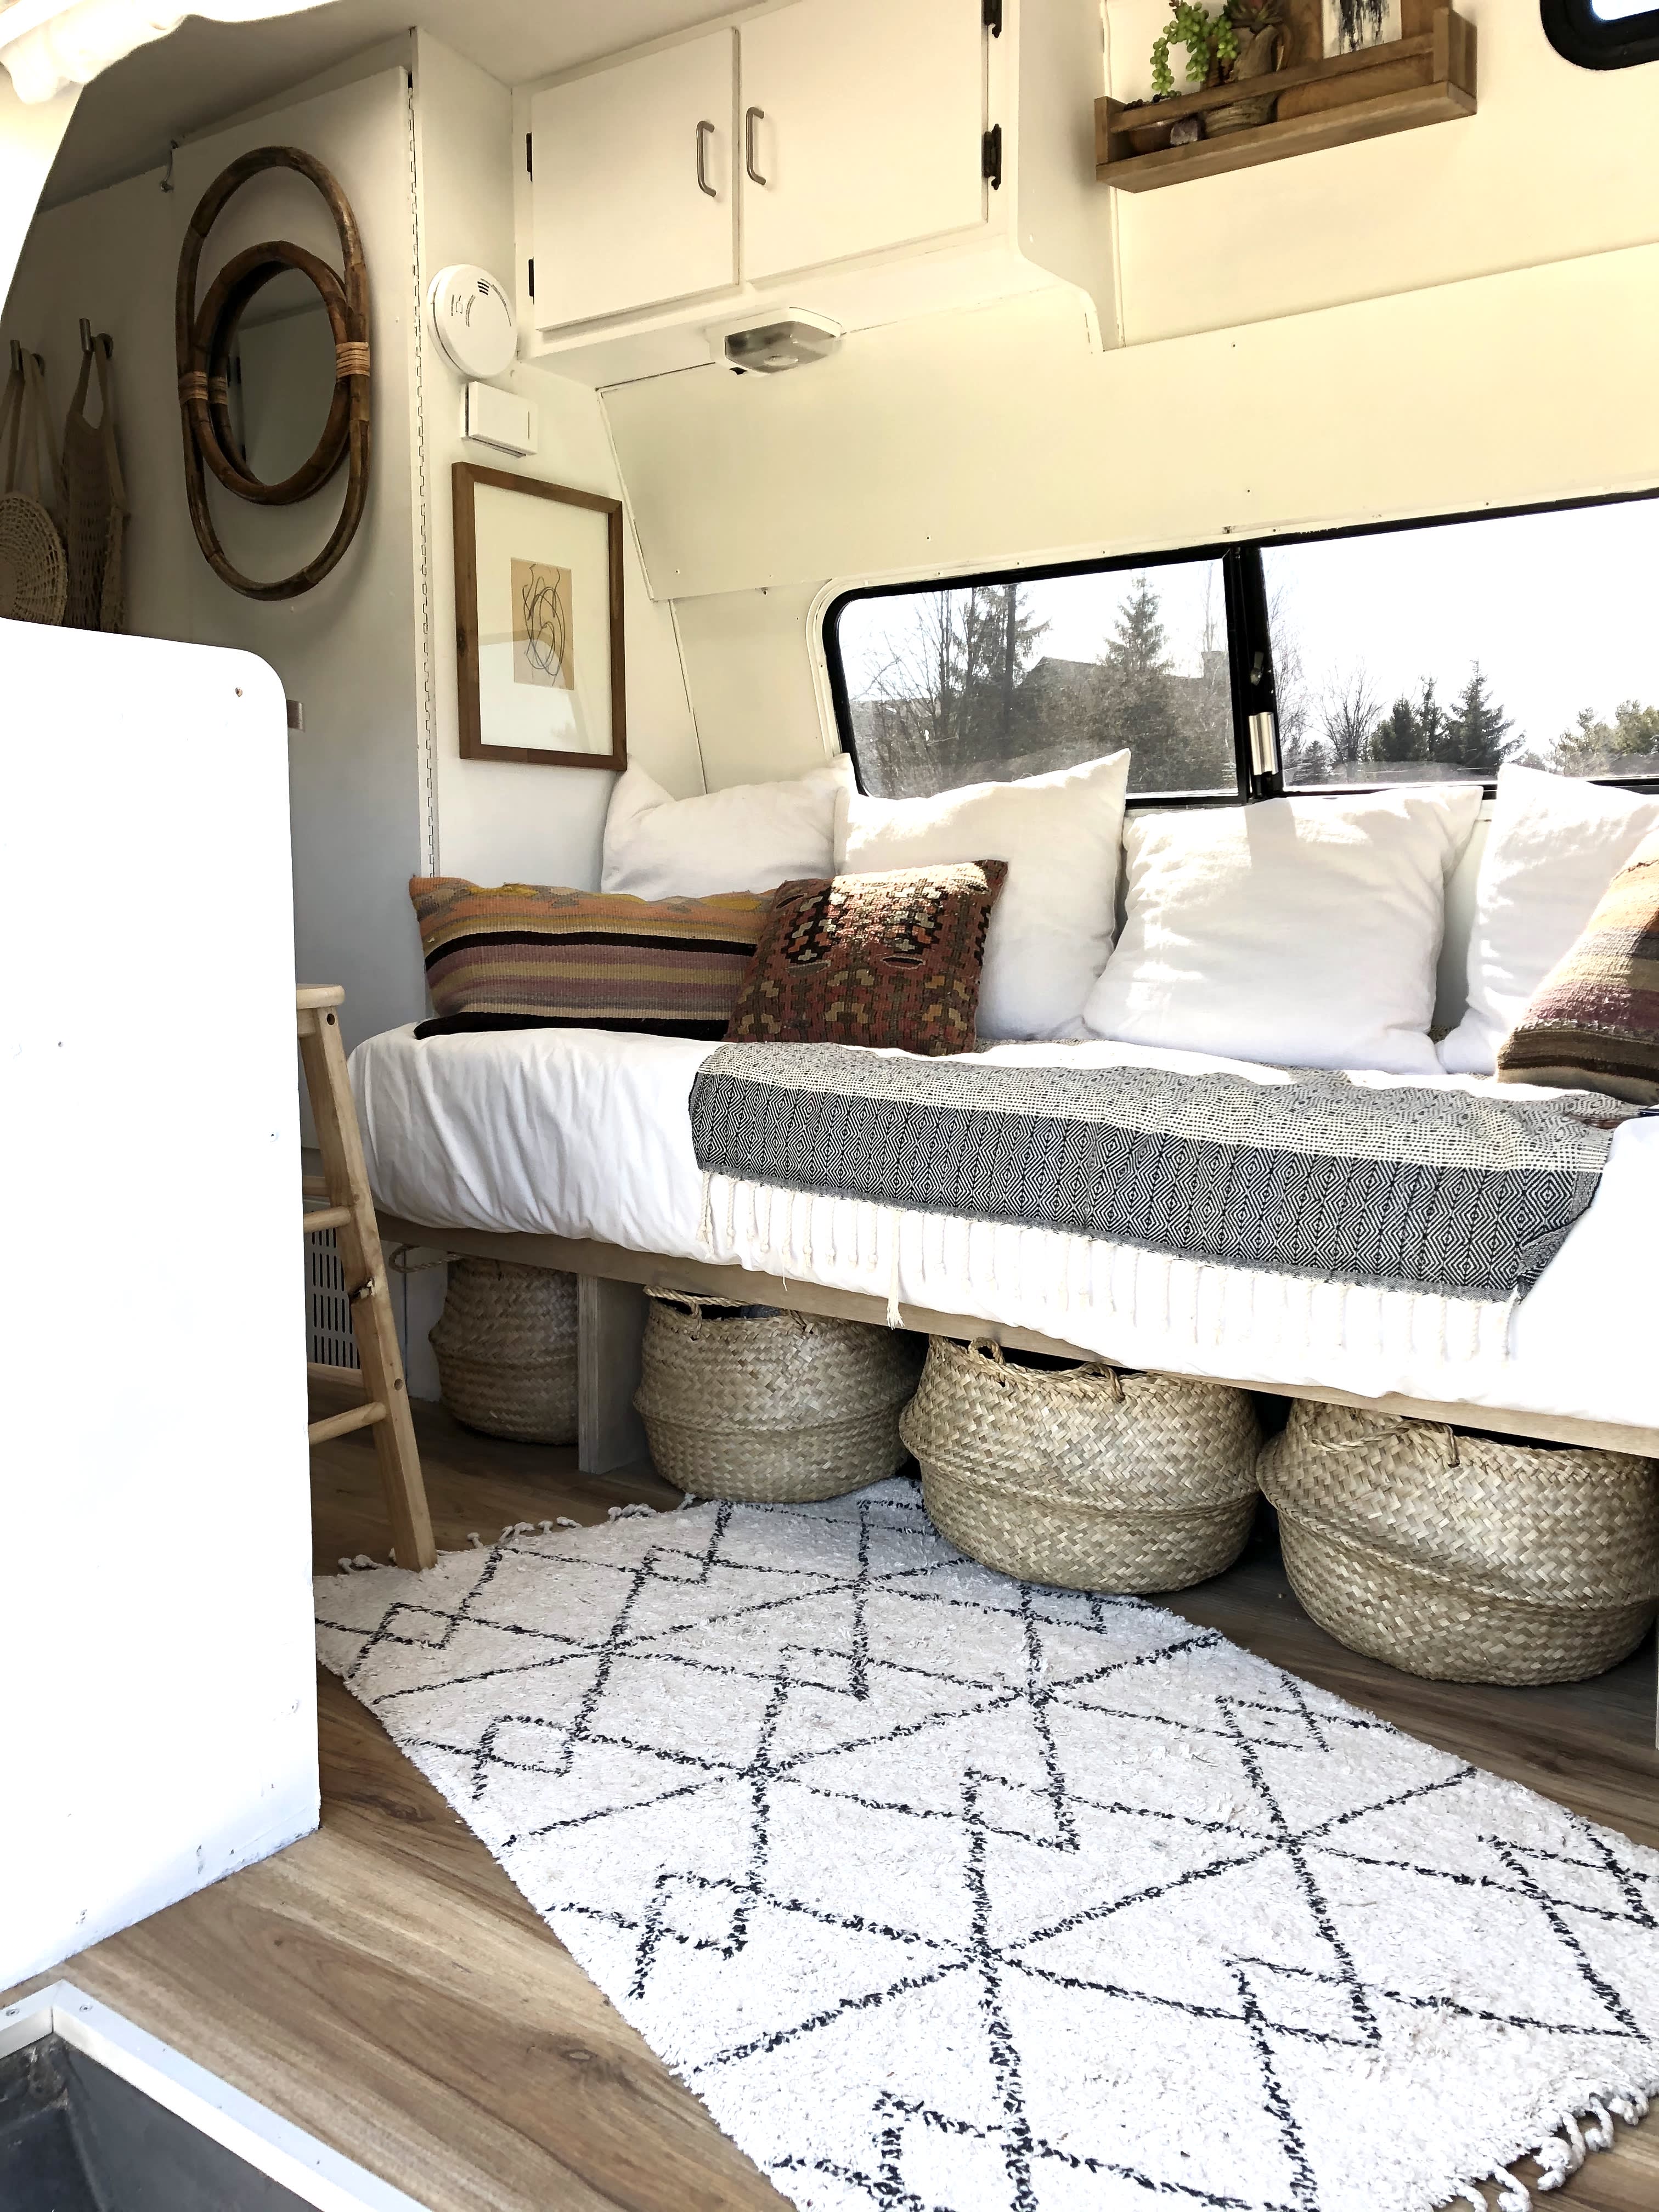 Upcycling Furniture - The Best Way to Build a Budget Campervan